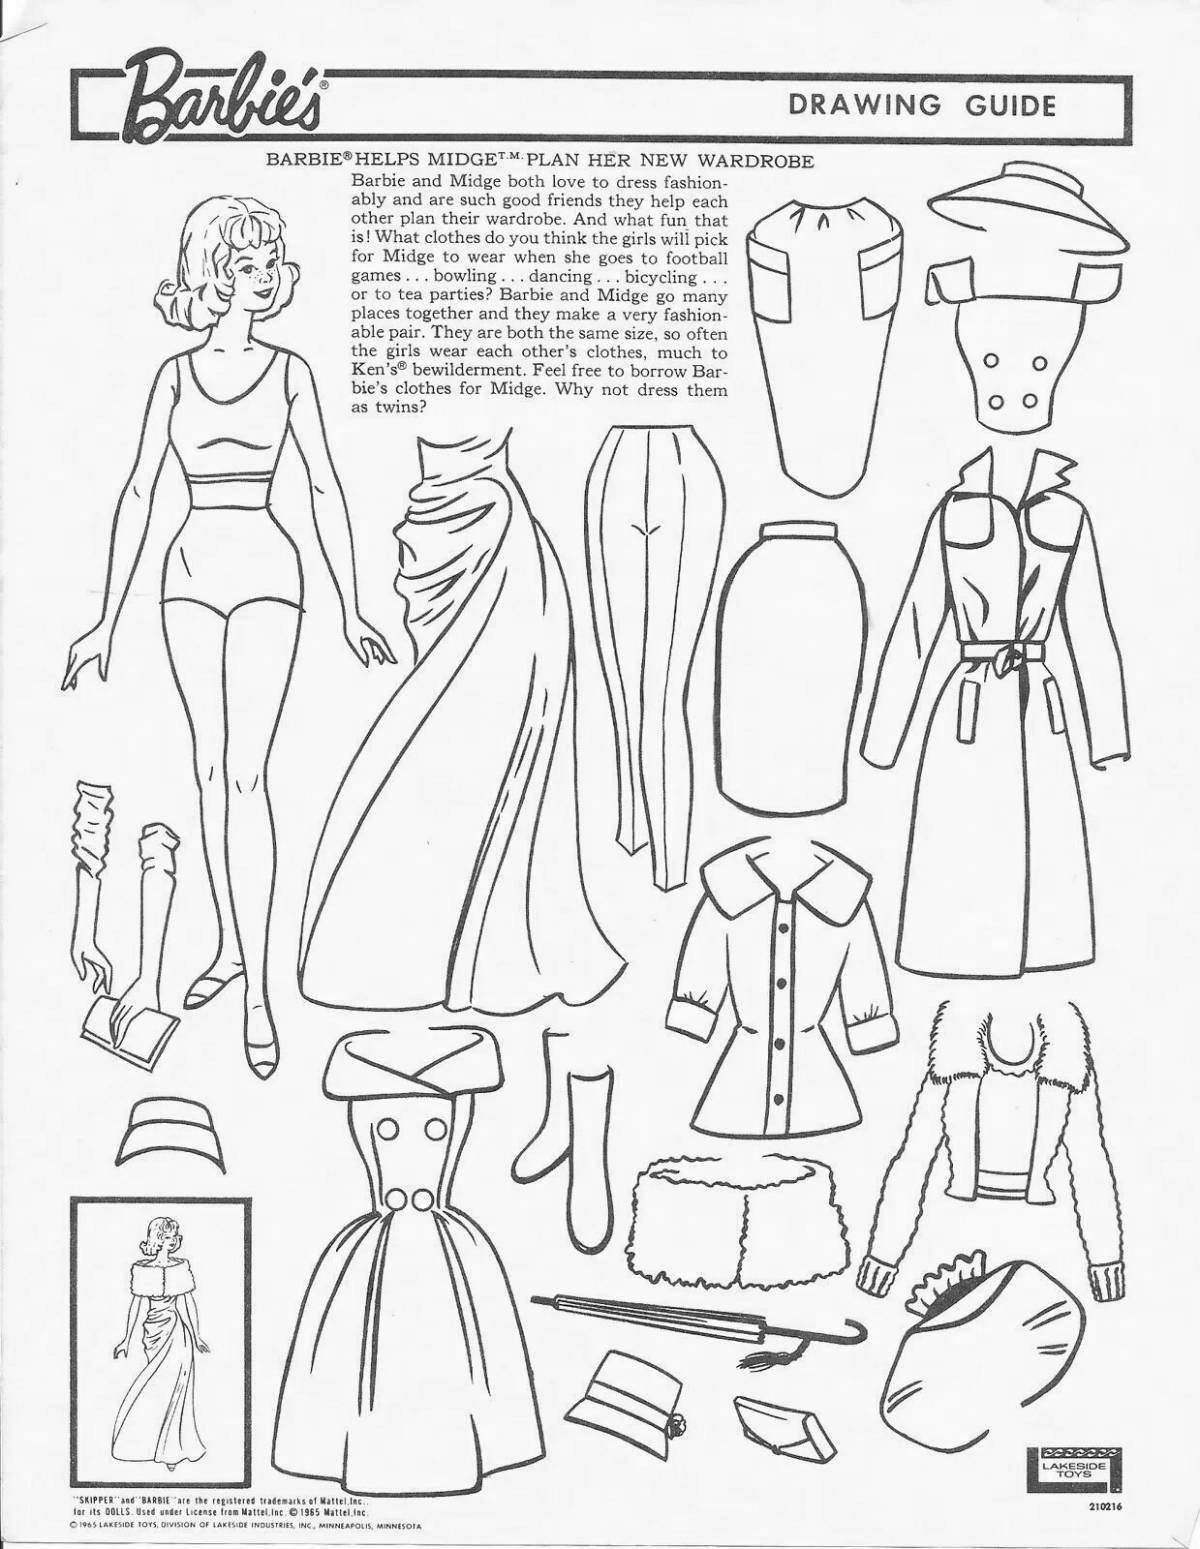 Adorable Barbie paper doll coloring book